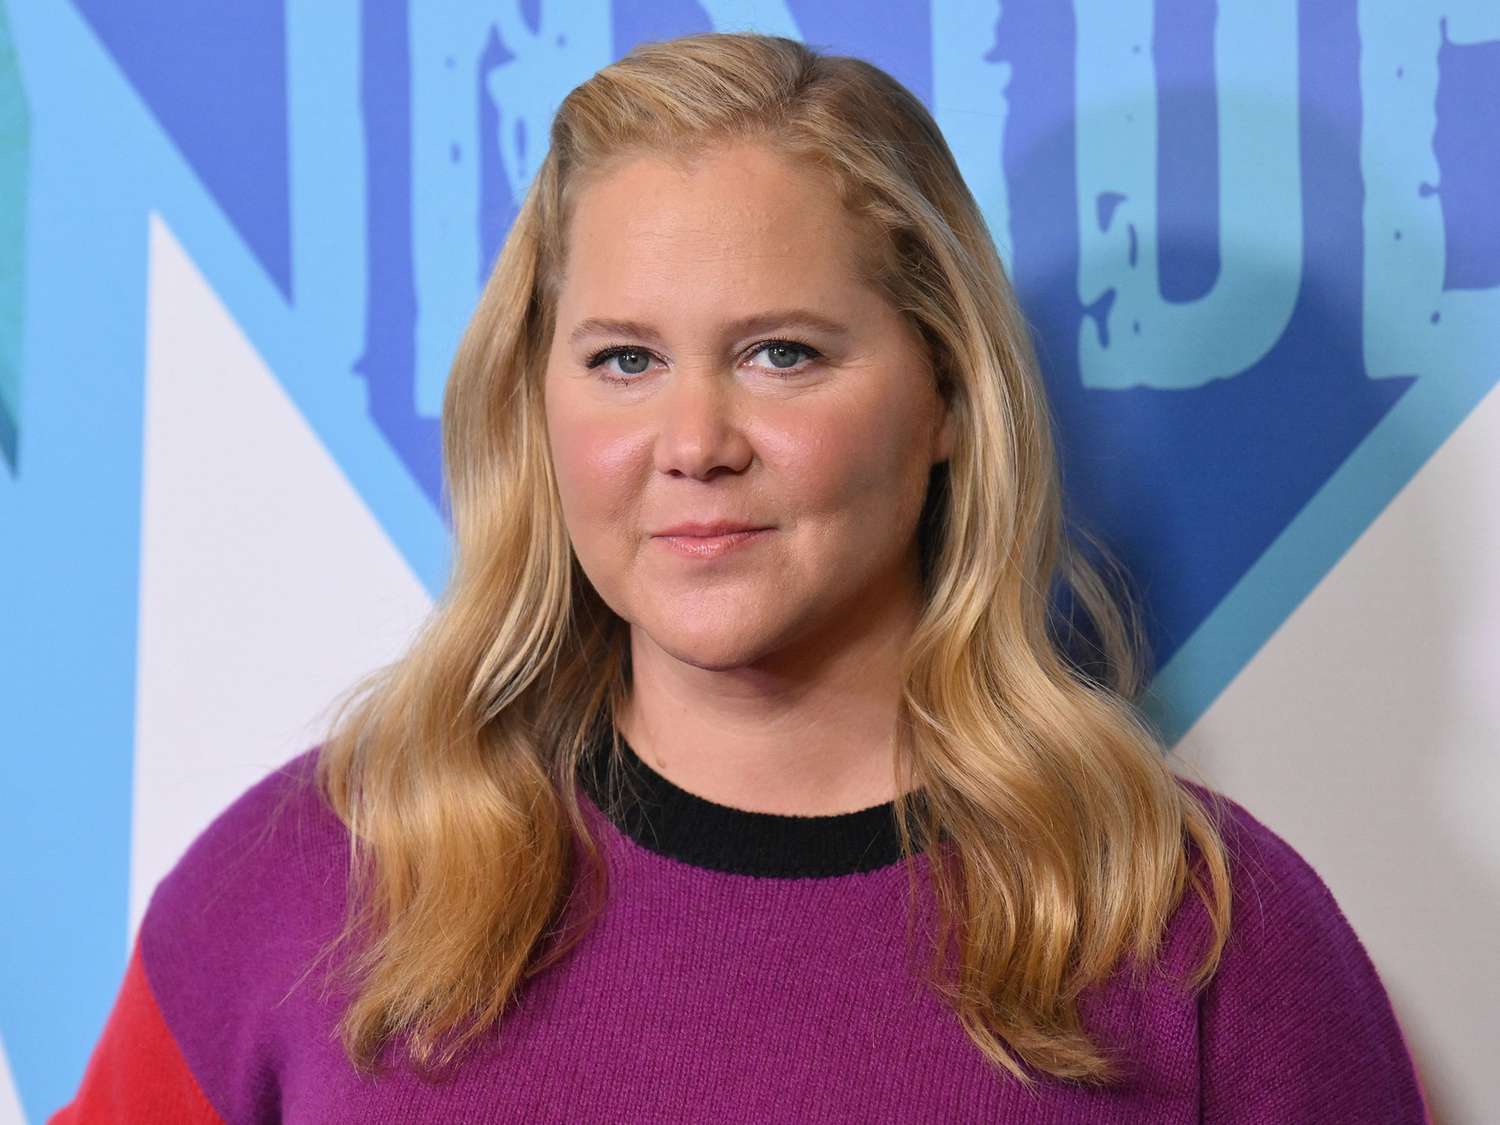 Amy Schumer on Reaction to Her Looks amid Health Scare: Supporters 'Are Not Going to Care If My Face Is Puffy'